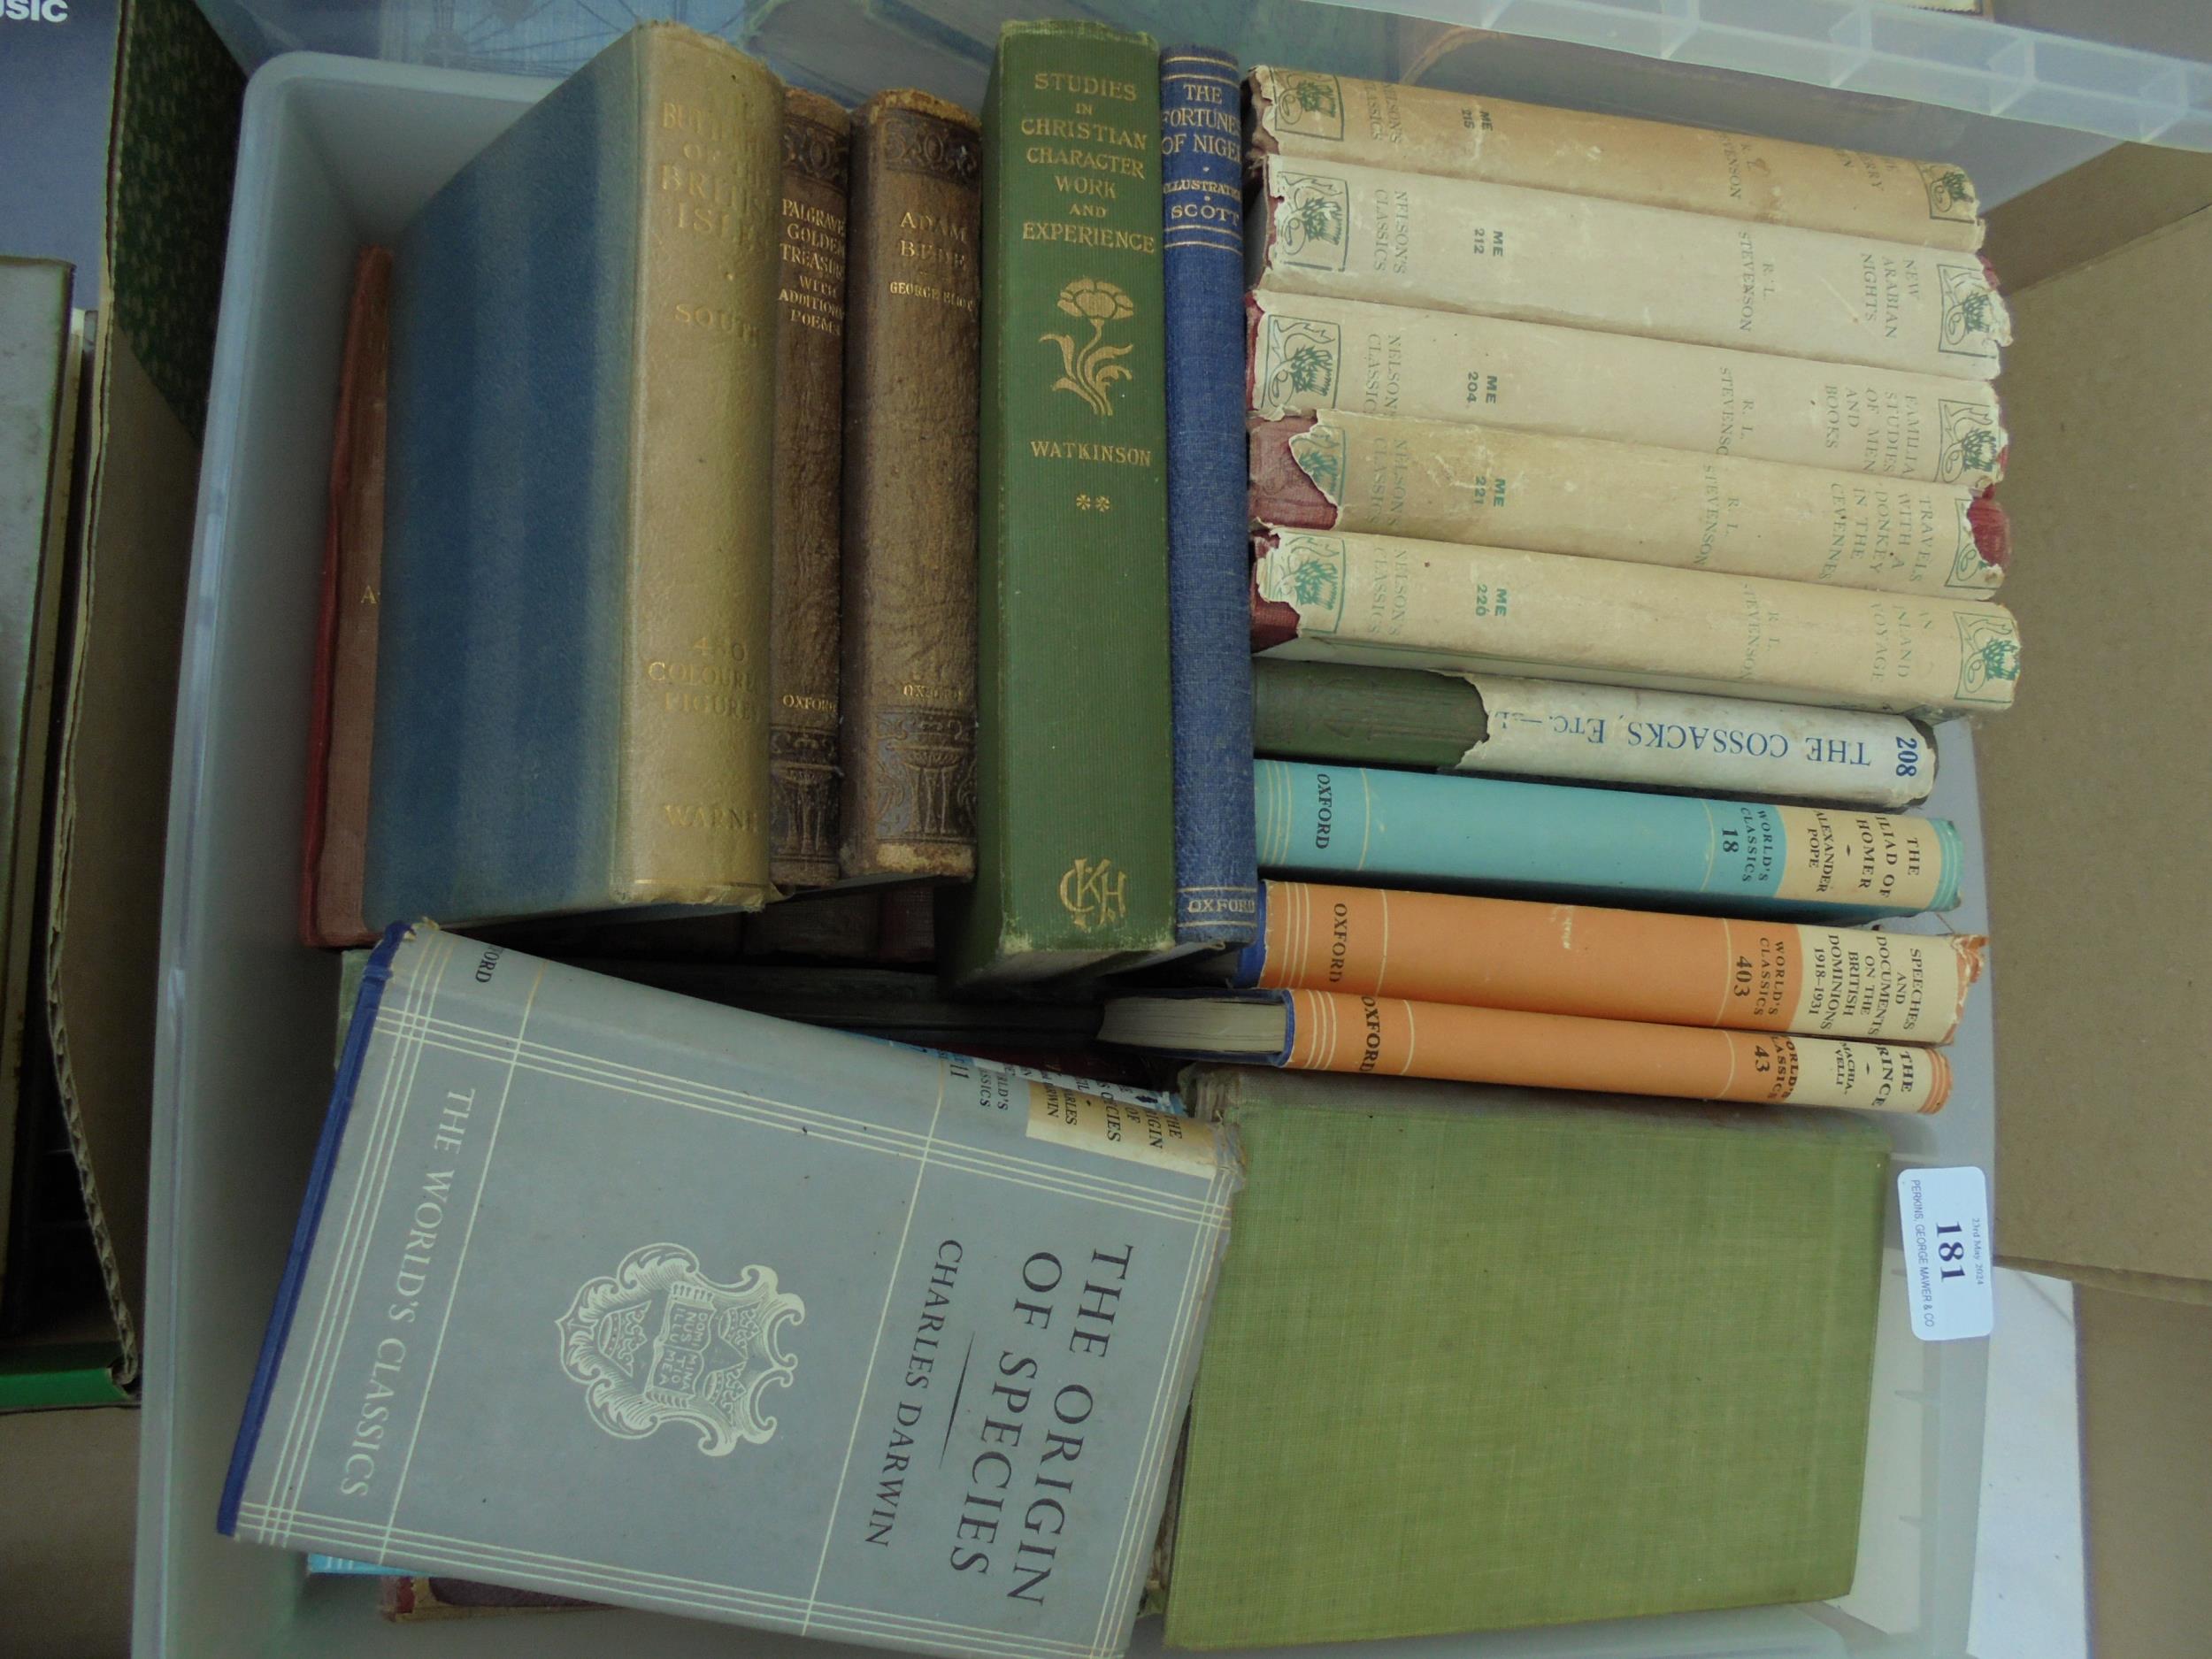 Miscellaneous books in literature and history